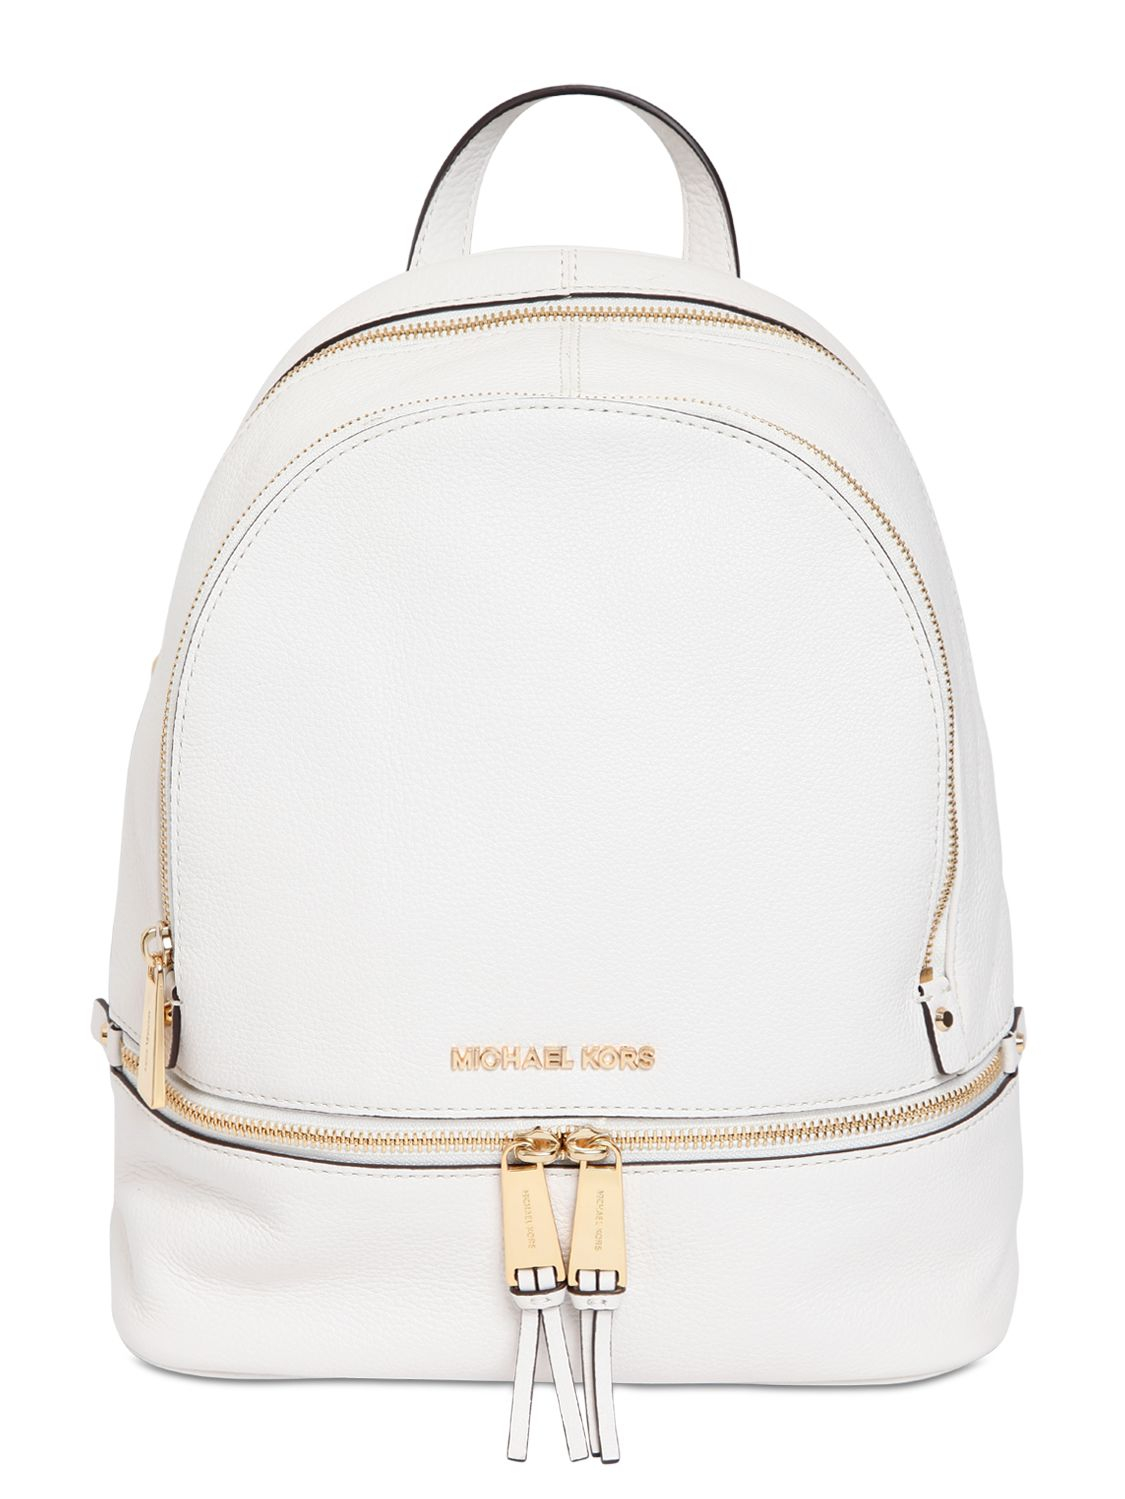 MICHAEL Michael Kors Reha Leather Small Backpack in White for Men - Lyst